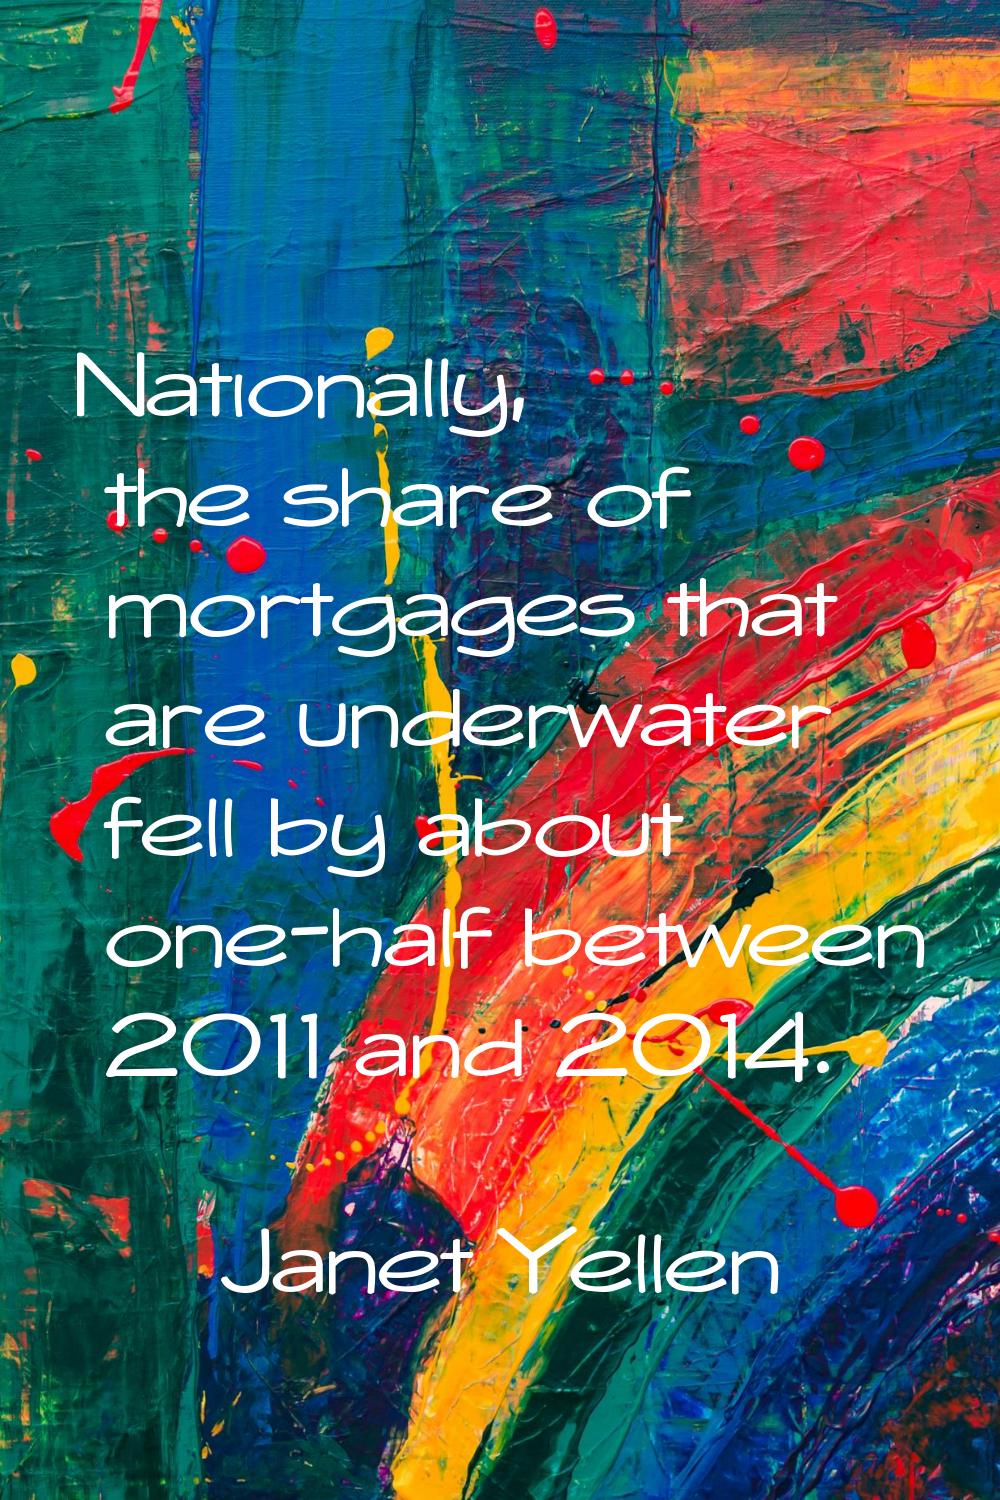 Nationally, the share of mortgages that are underwater fell by about one-half between 2011 and 2014